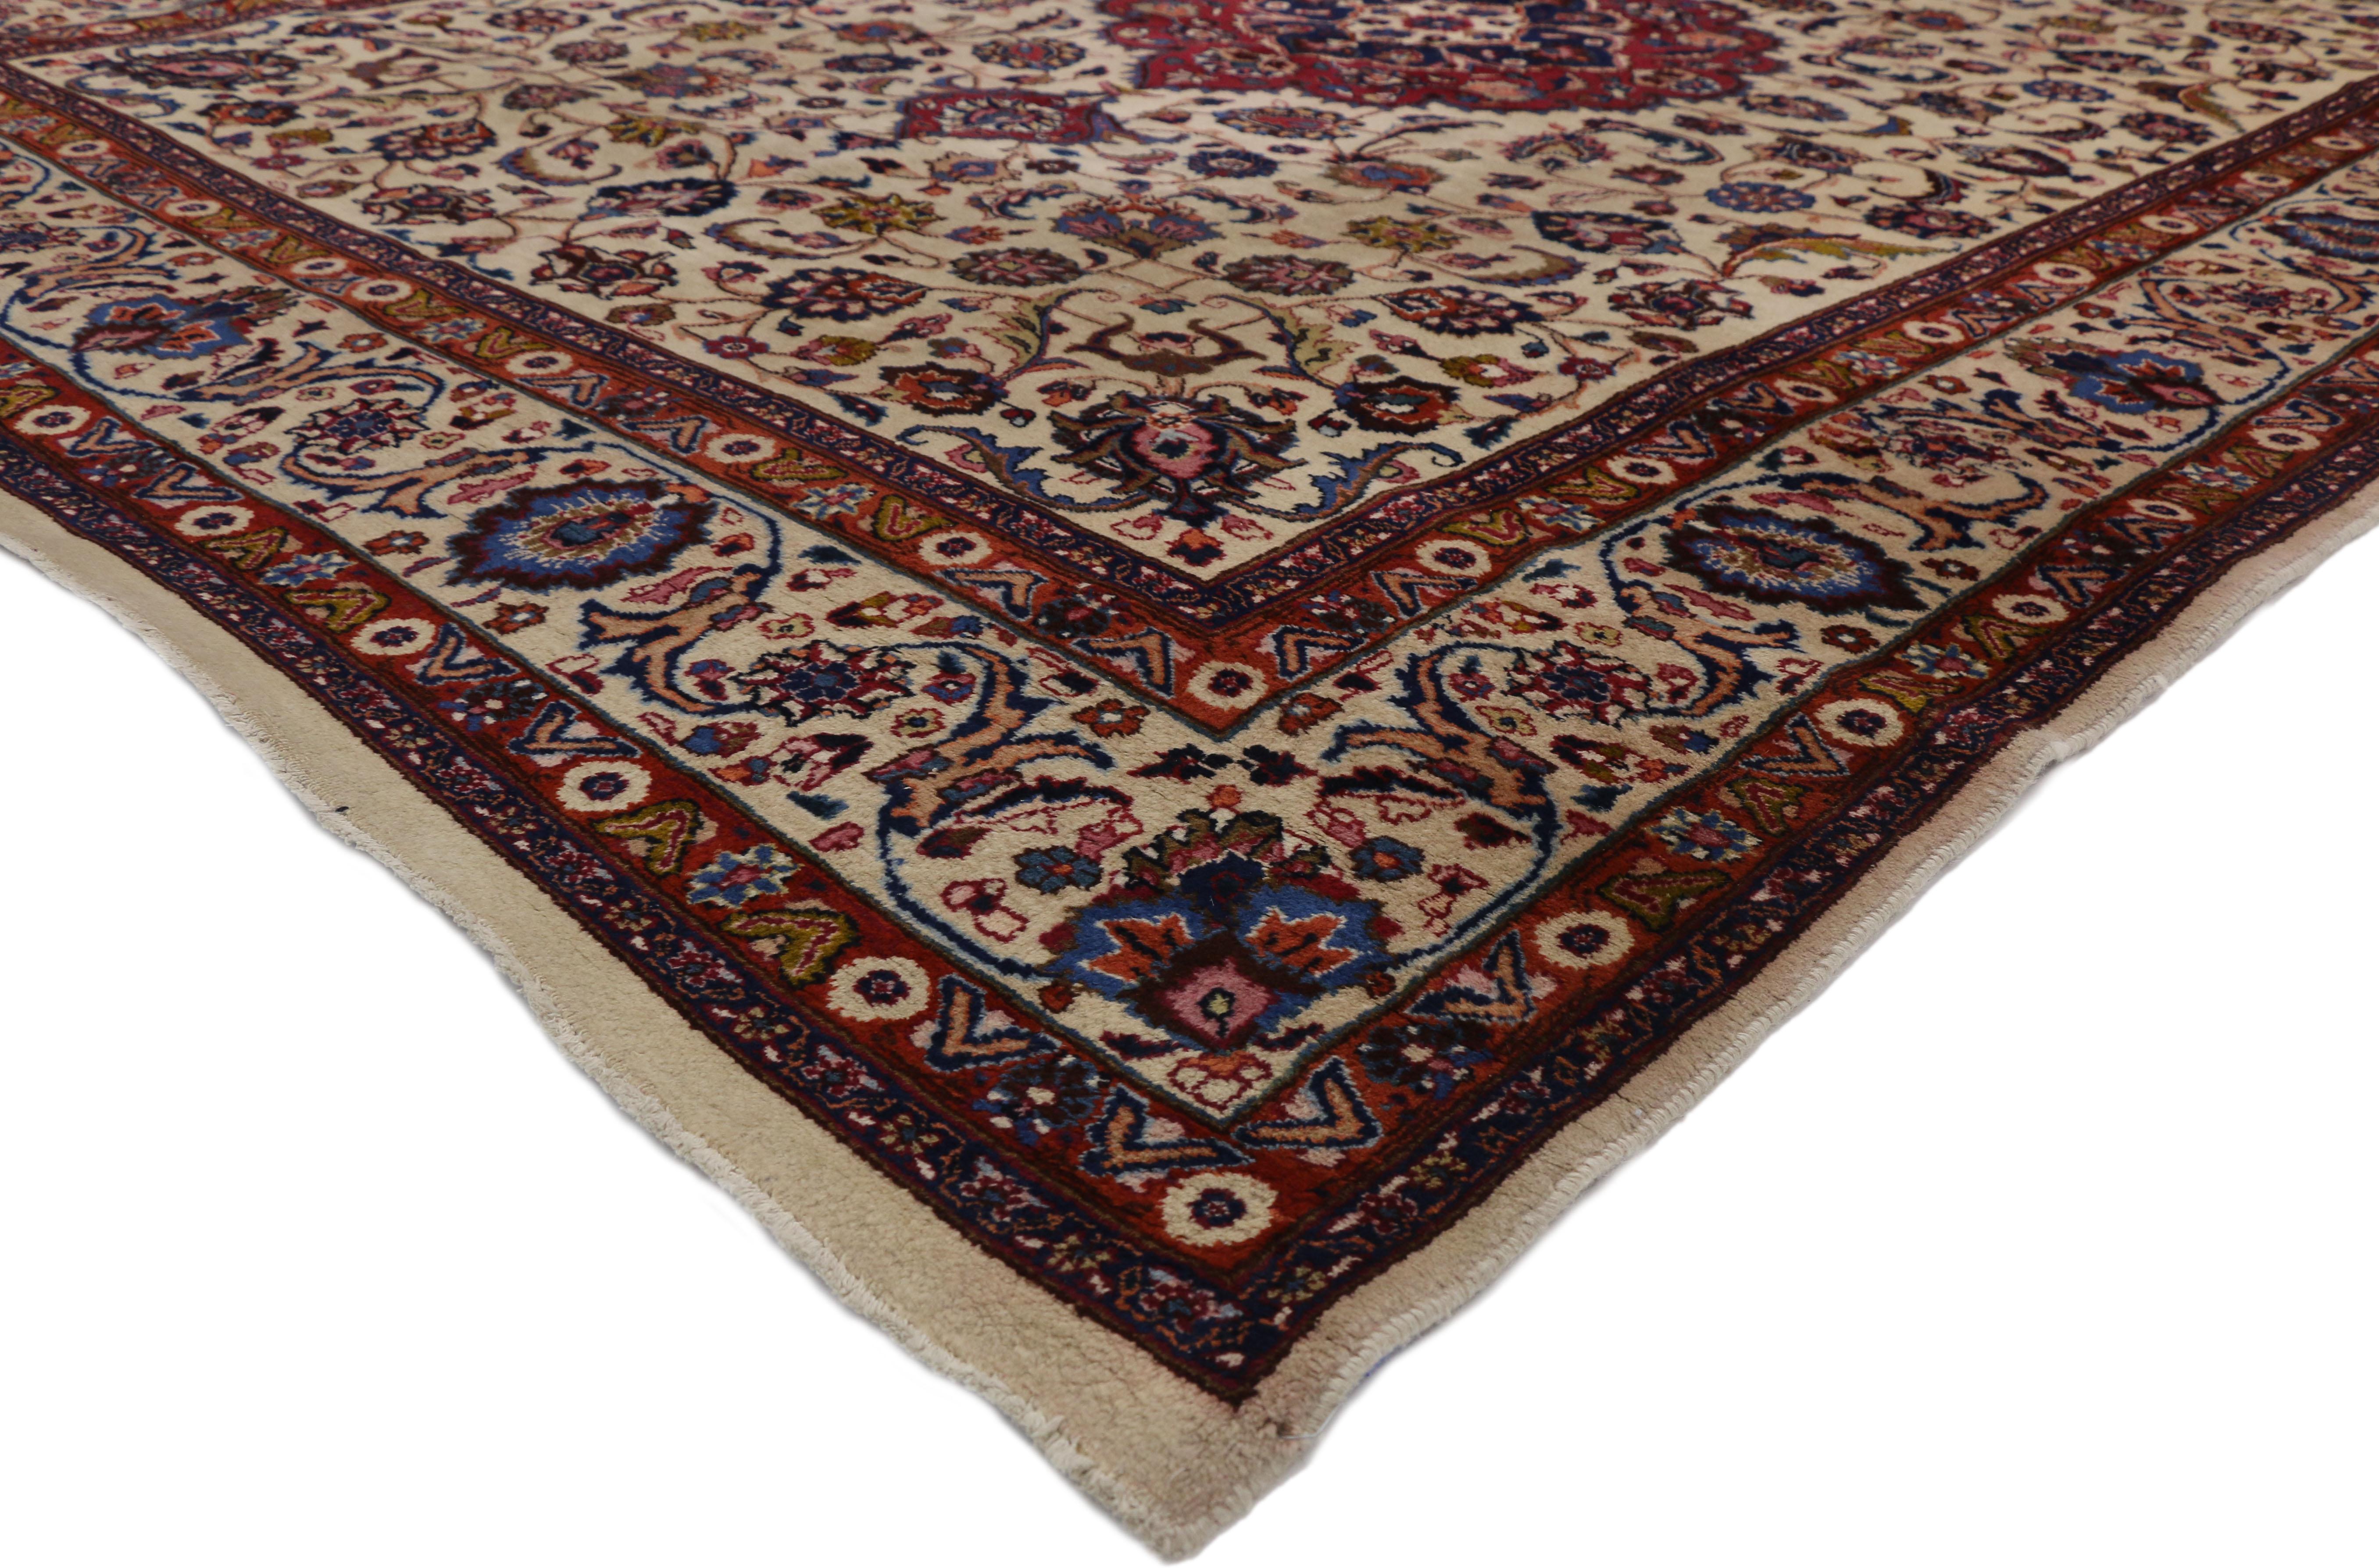 74418, antique Persian Mashhad rug with traditional style. With a timeless design and classic style, this antique Persian Mashhad rug keeps the eyes entertained, but it is still refined and elegant. The meticulous details radiate throughout the